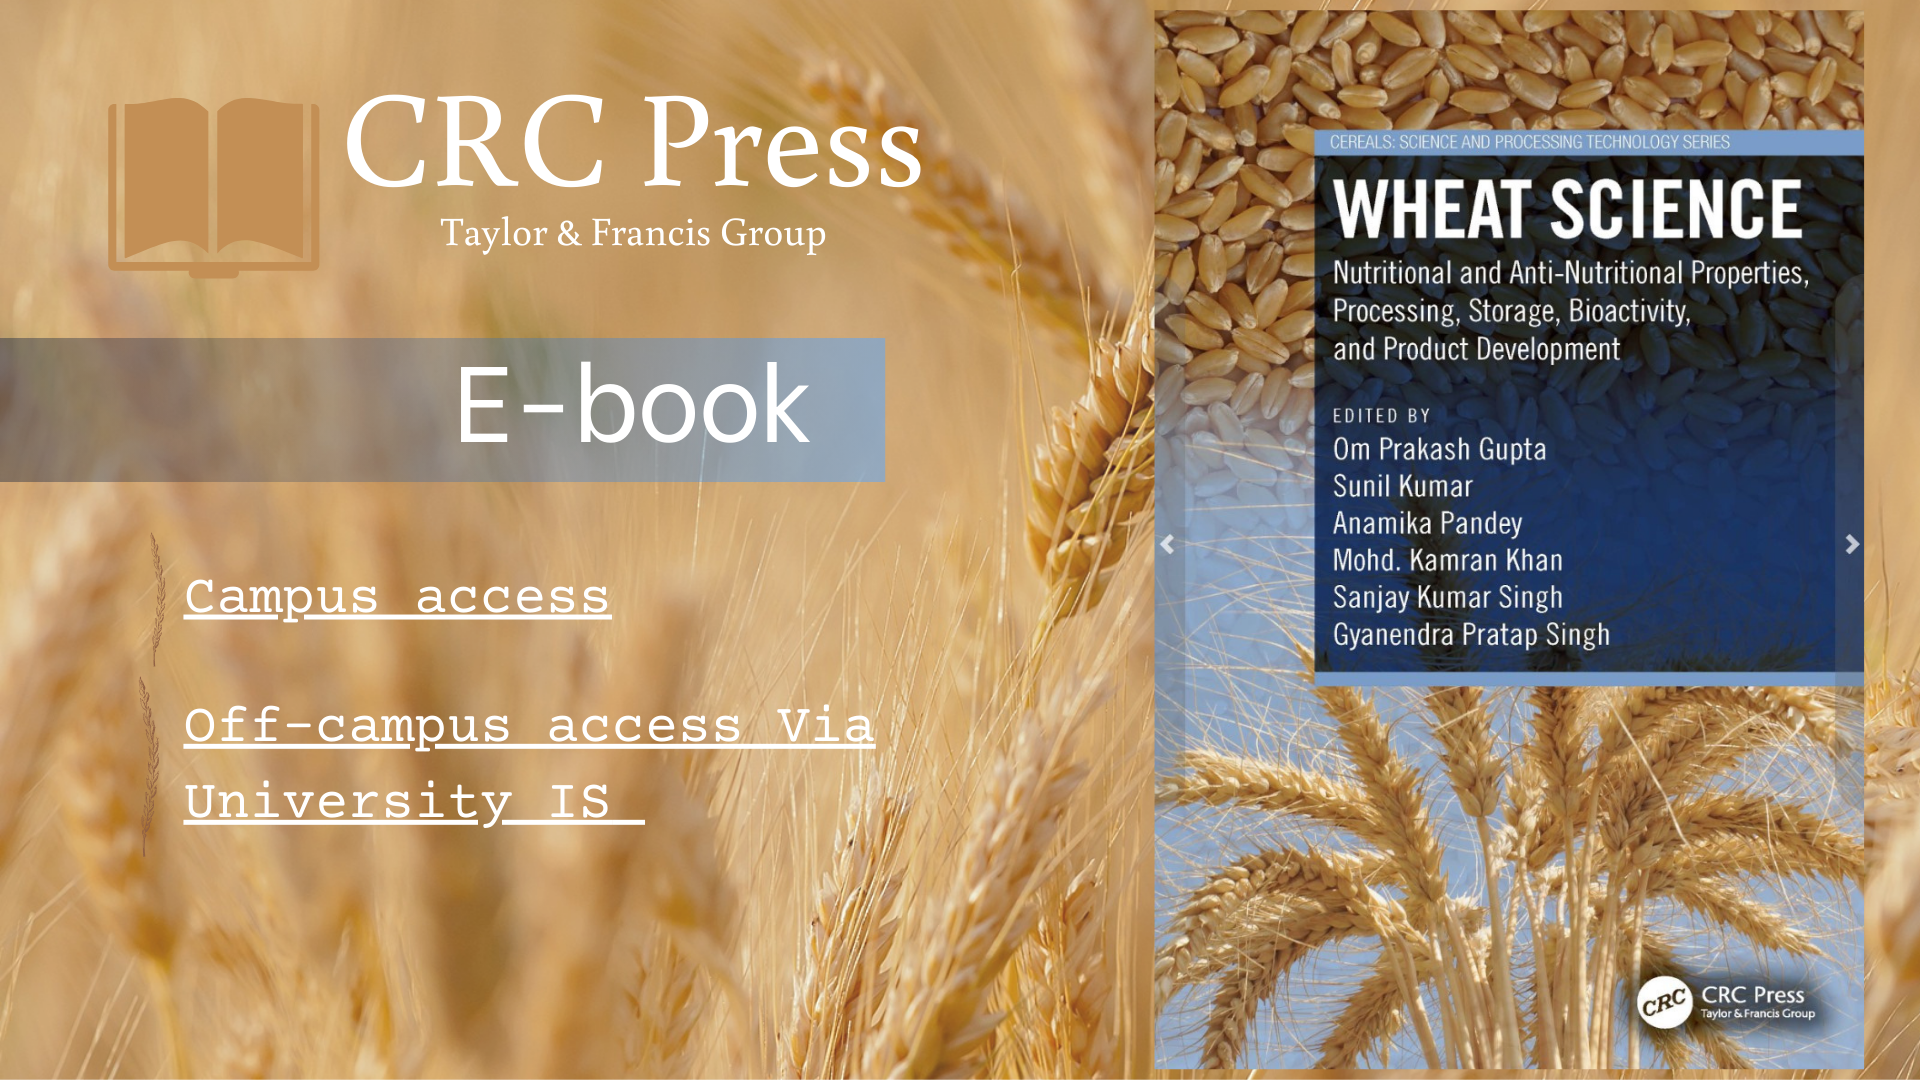 Gupta, O.P., Kumar, S., Pandey, A., Khan, M.K., Singh, S.K., & Singh, G.P. (Eds.). (2023). Wheat Science: Nutritional and Anti-Nutritional Properties, Processing, Storage, Bioactivity, and Product Development (1st ed.). CRC Press. 